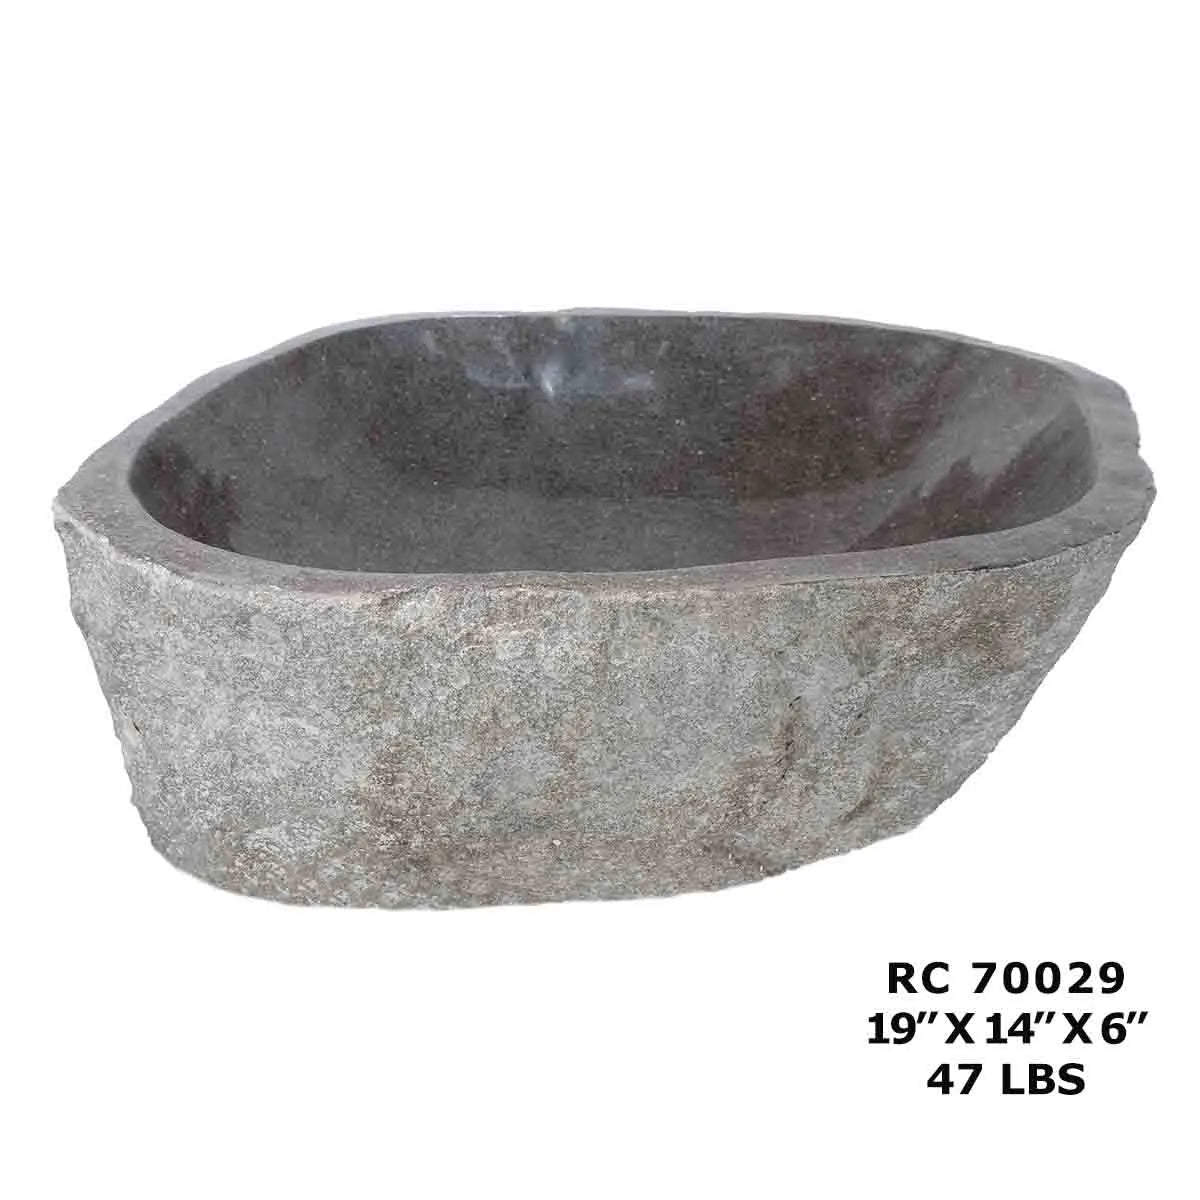 RC70029-Natural River Stone Oval Vessel Sink for Bathroom